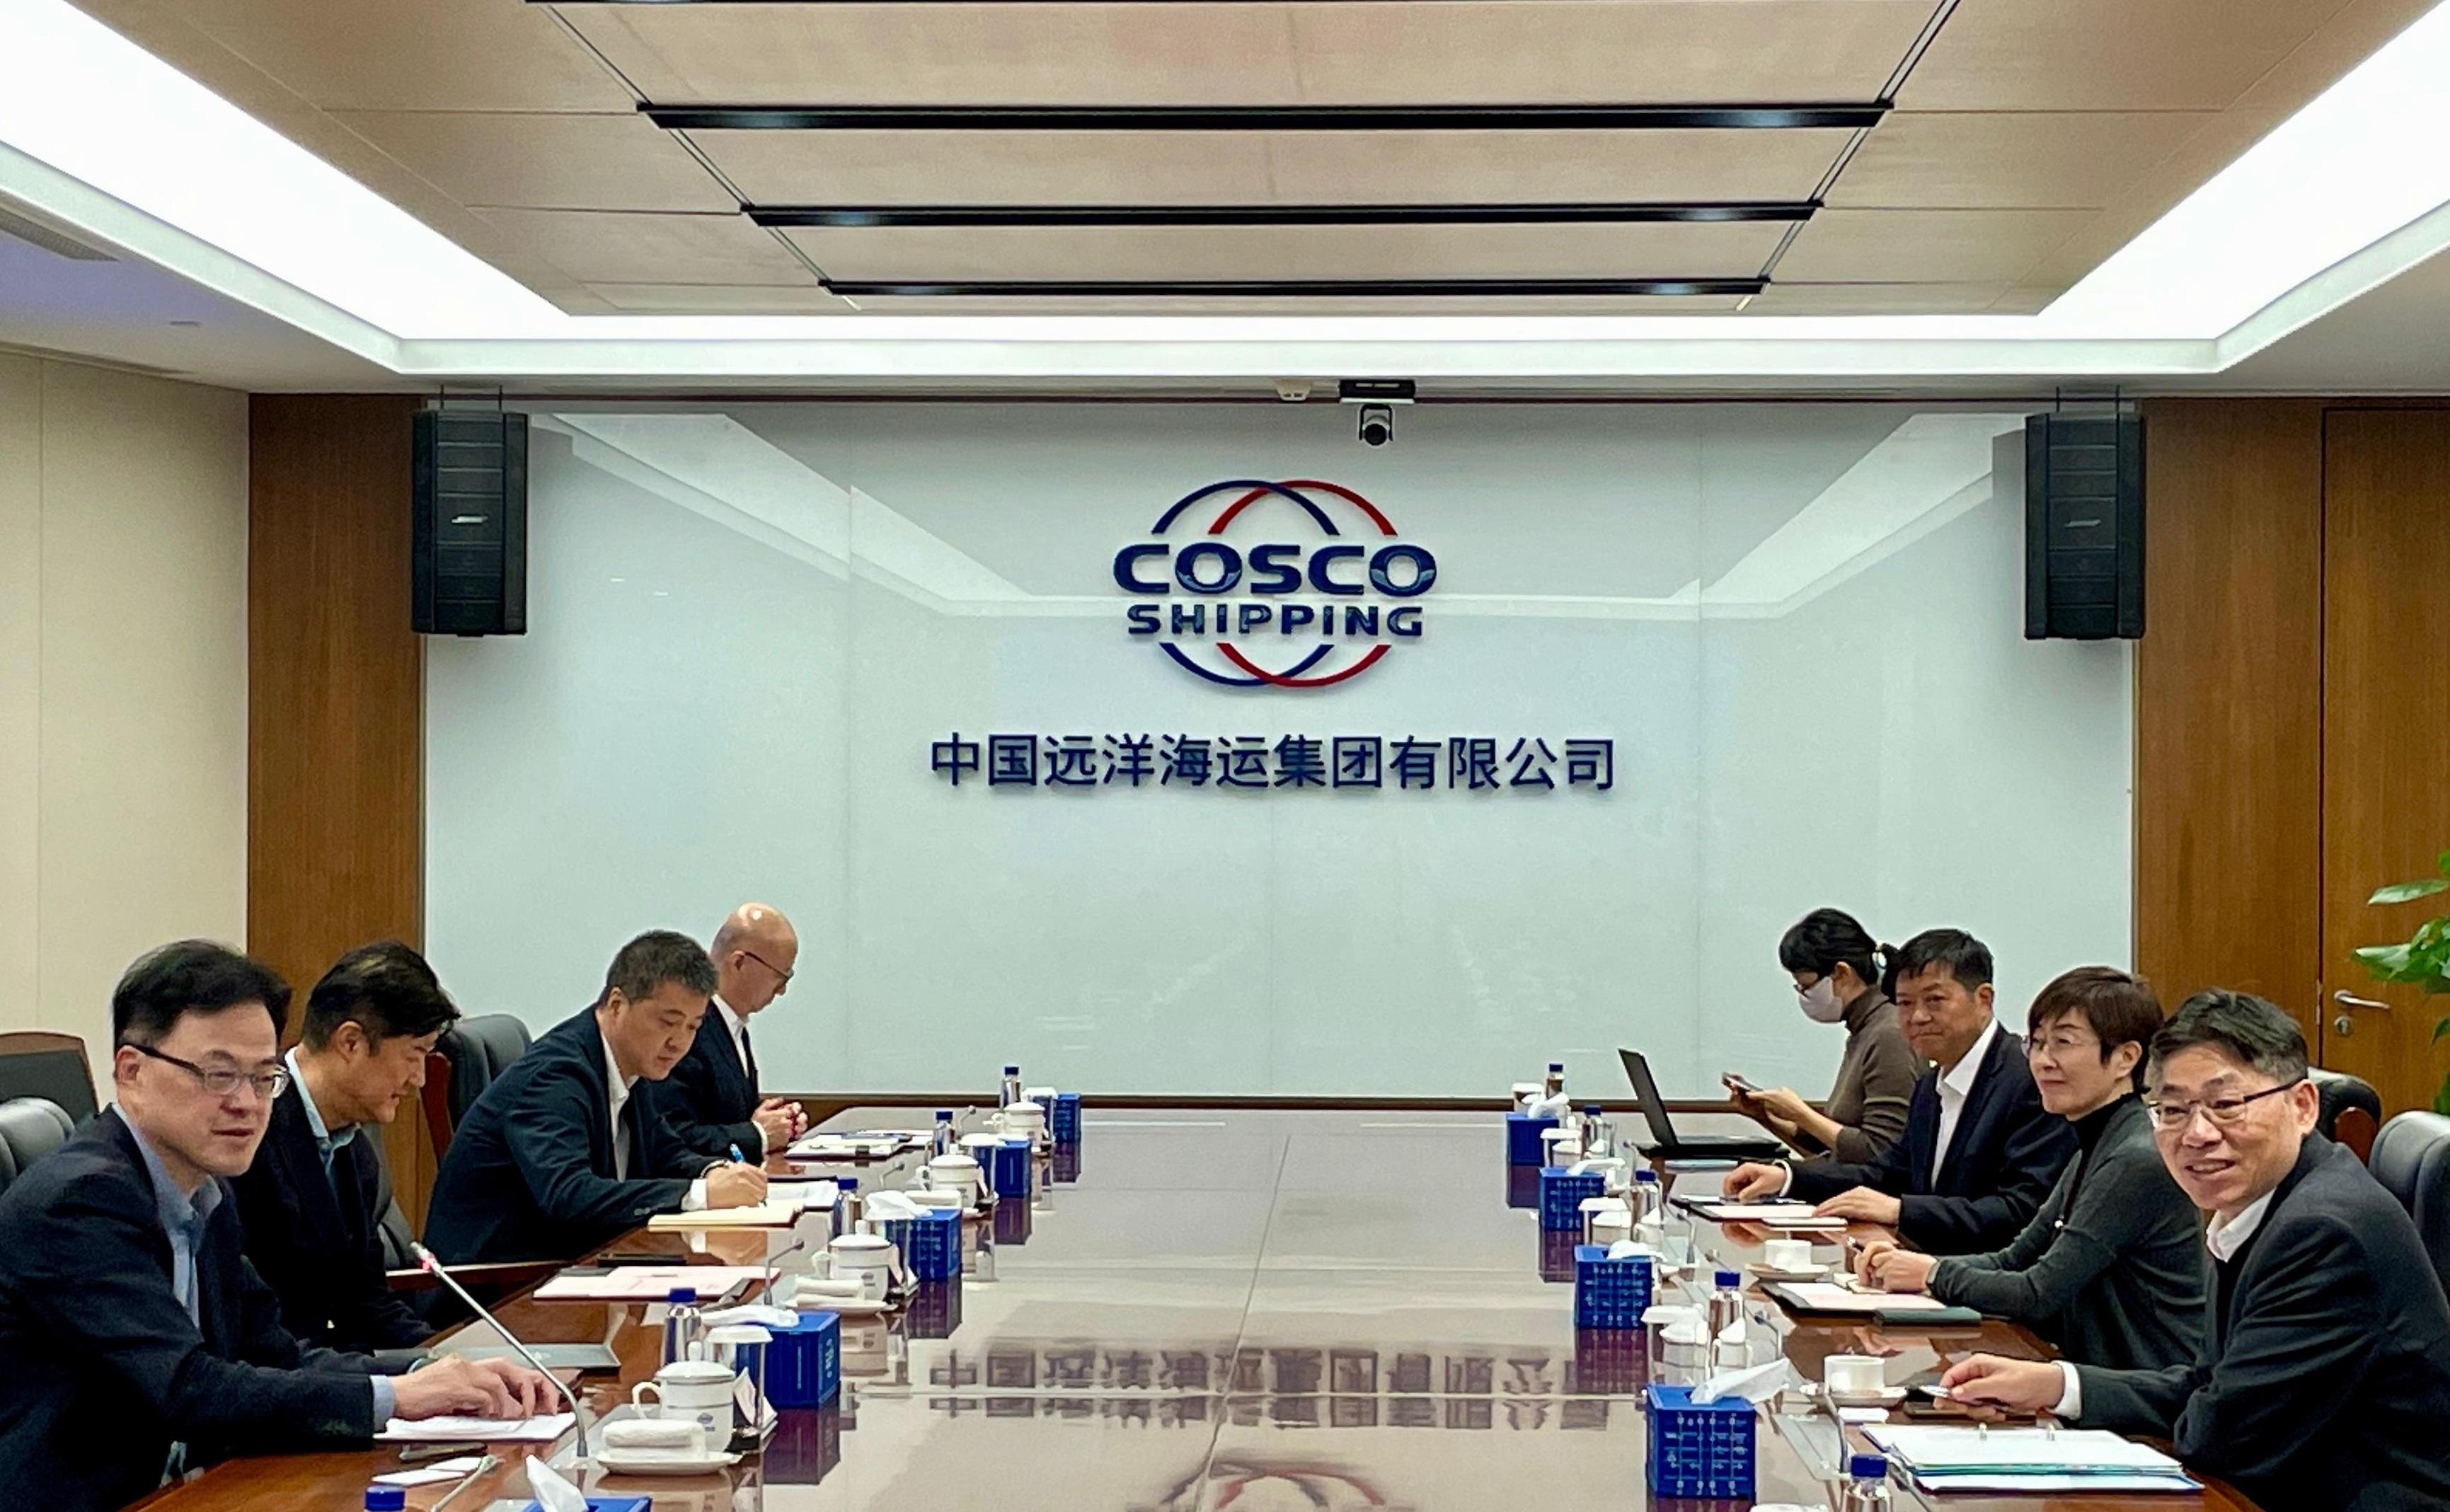 The Secretary for Transport and Logistics, Mr Lam Sai-hung (first right), pays a visit to China COSCO Shipping Corporation this afternoon (December 6) and highlights Hong Kong's latest developments on maritime, ports and logistics.